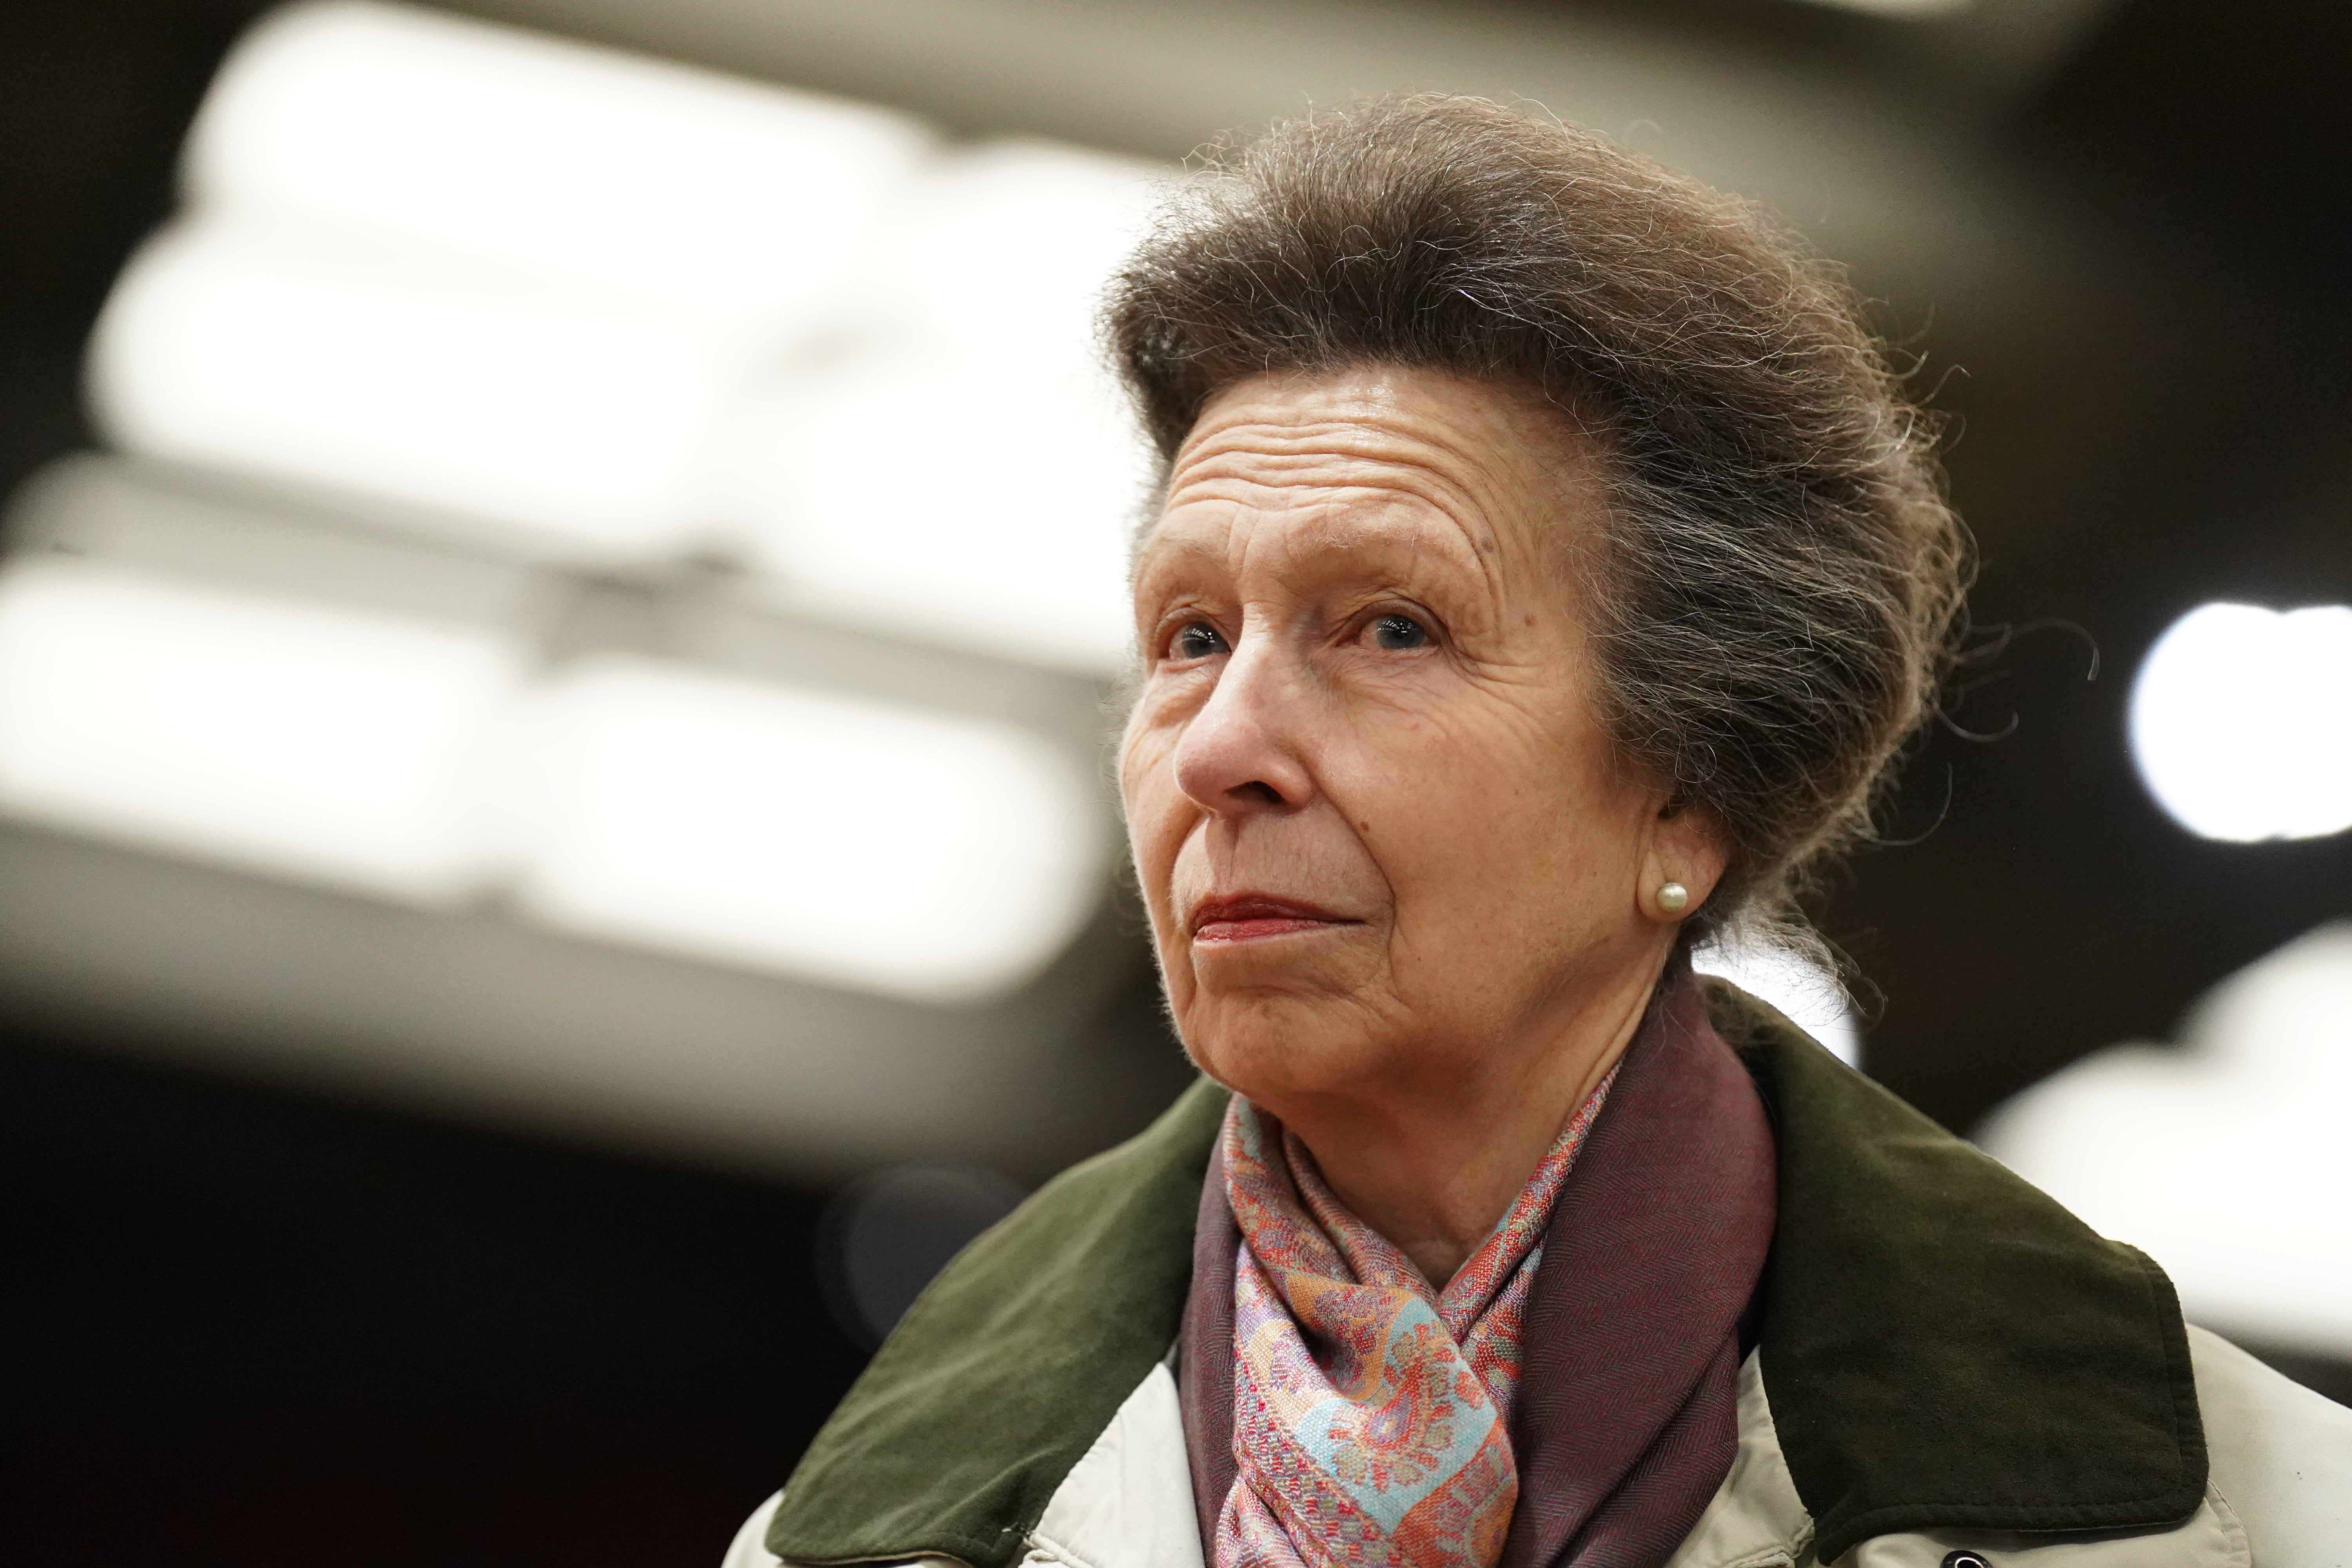 princess anne, buckingham palace, princess anne issues statement on cancelled engagement after leaving hospital